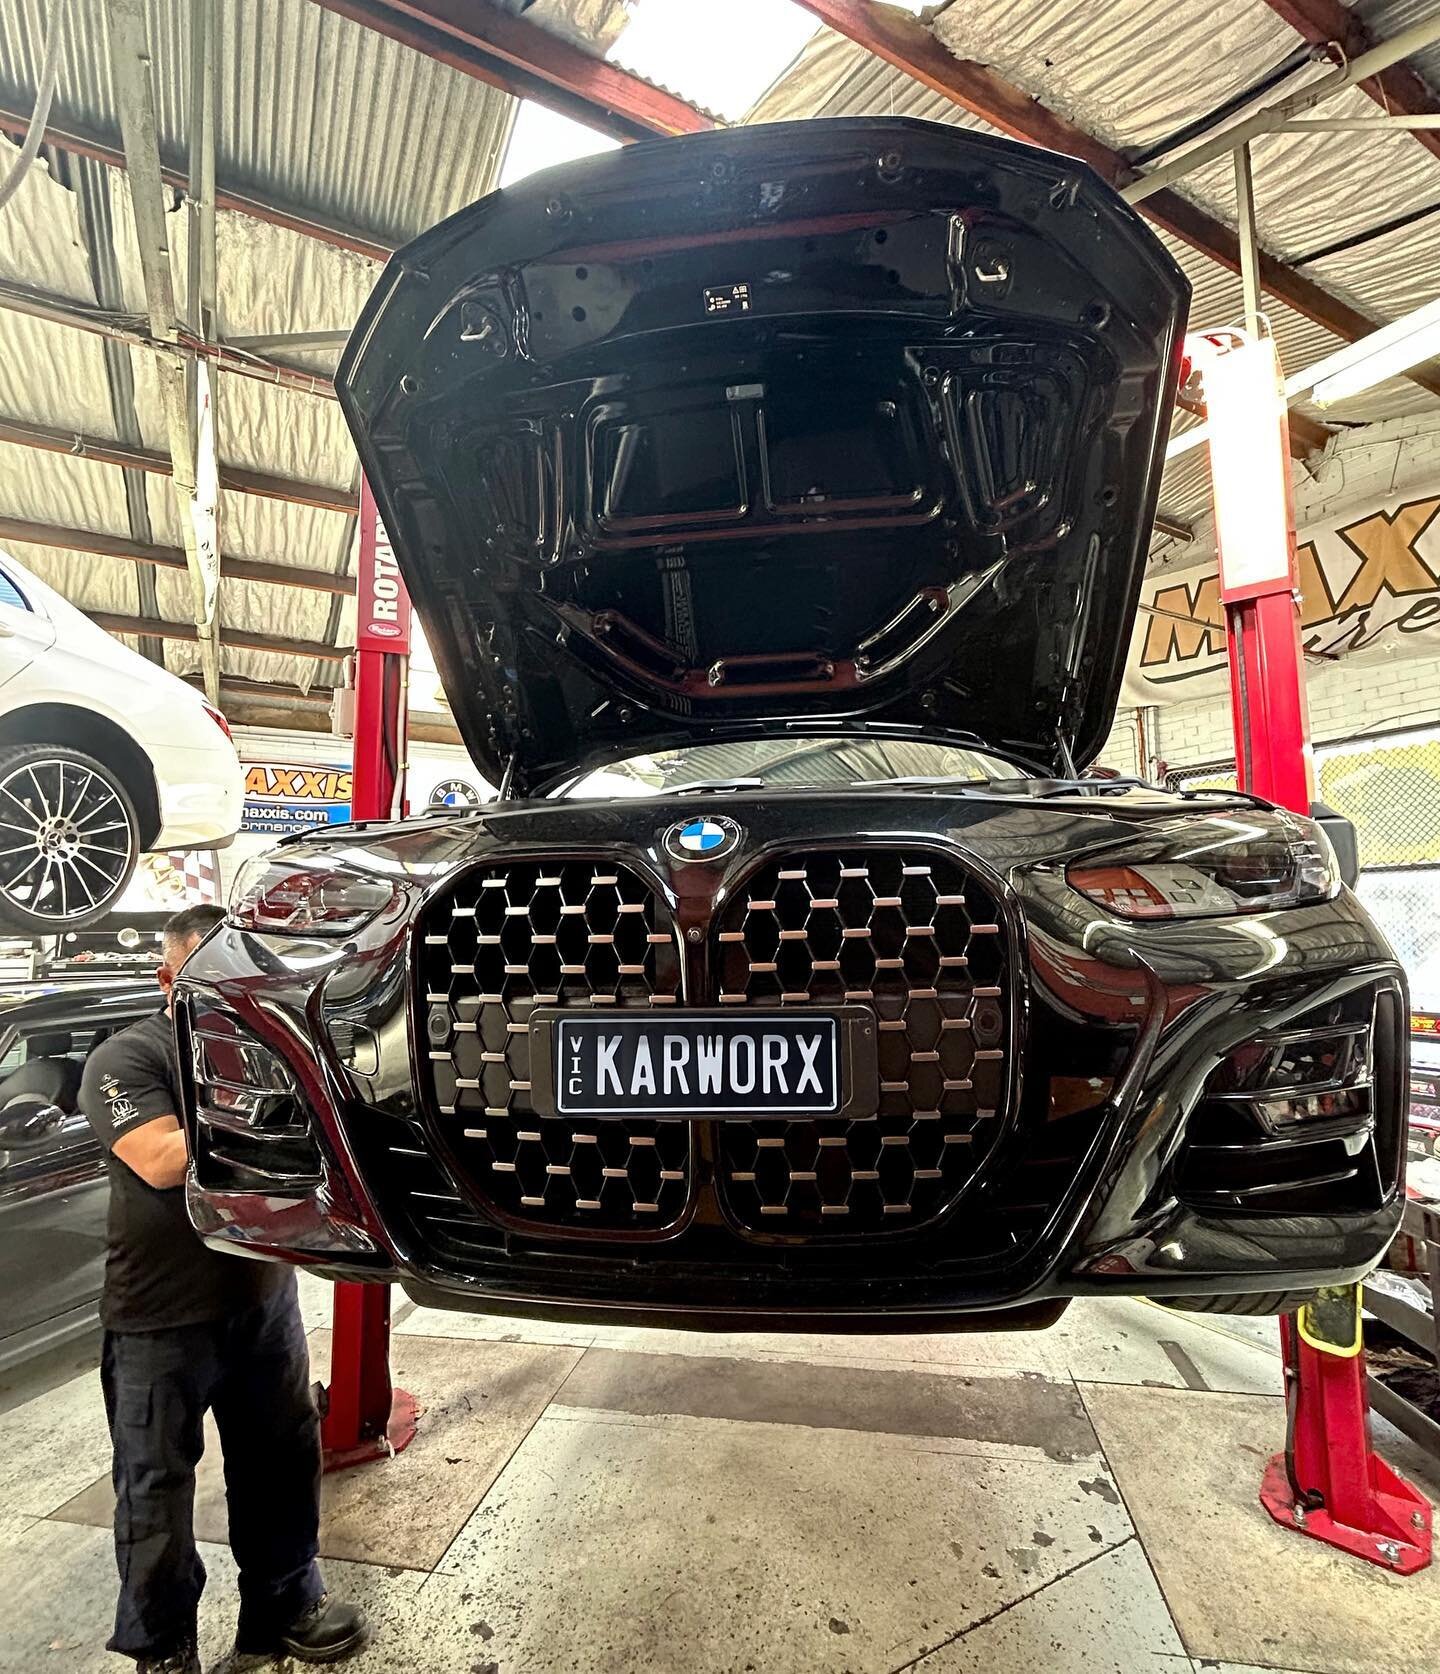 430i 🏁 Book in your vehicle for Roadworthy and service with our qualified technicians at Karworx! 🧑&zwj;🔧Call us today to book in or click the link in our bio to contact us!
📞Essendon 9370 2323
📞Collingwood 9419 8721
📞Ringwood East 9870 6091

#